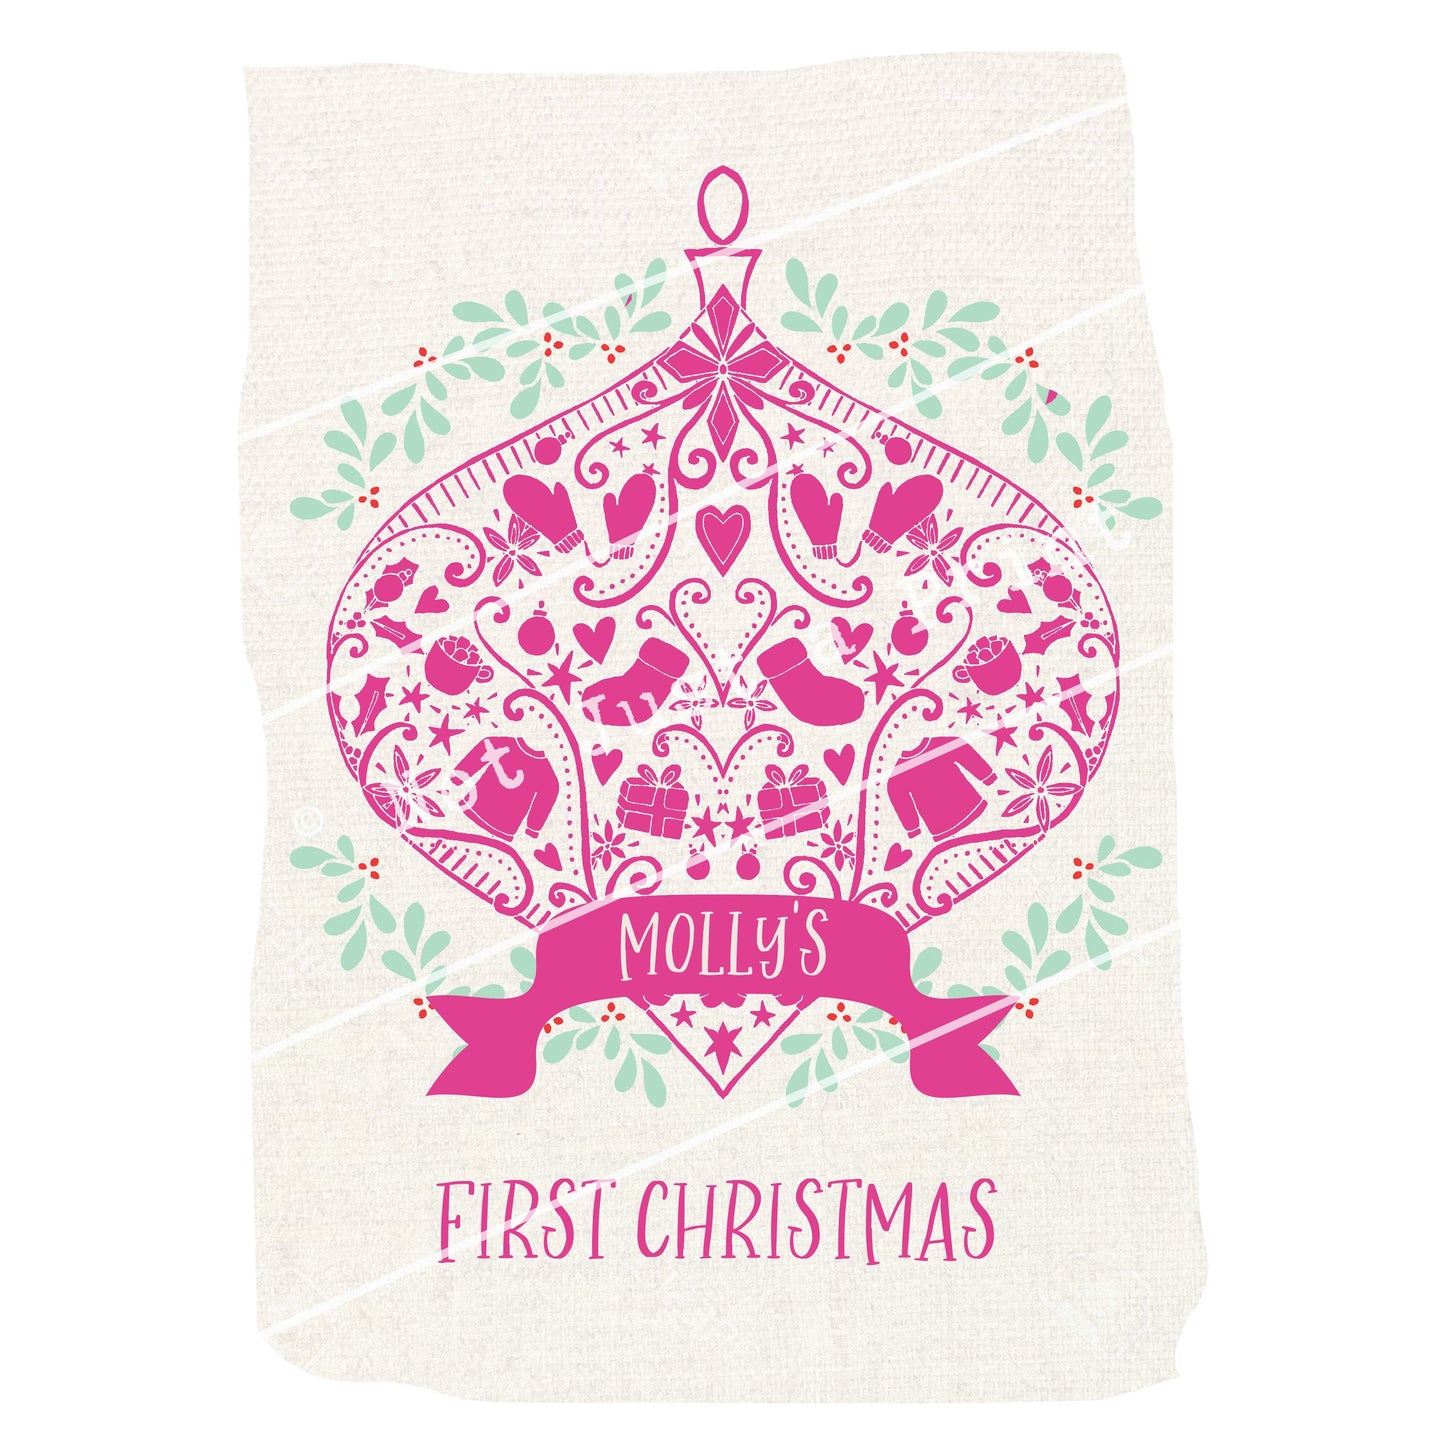 Decorative Christmas Sack - Customised For 1st Christmas Or Eve With Any Words - Kids Or Adults Gift Bag